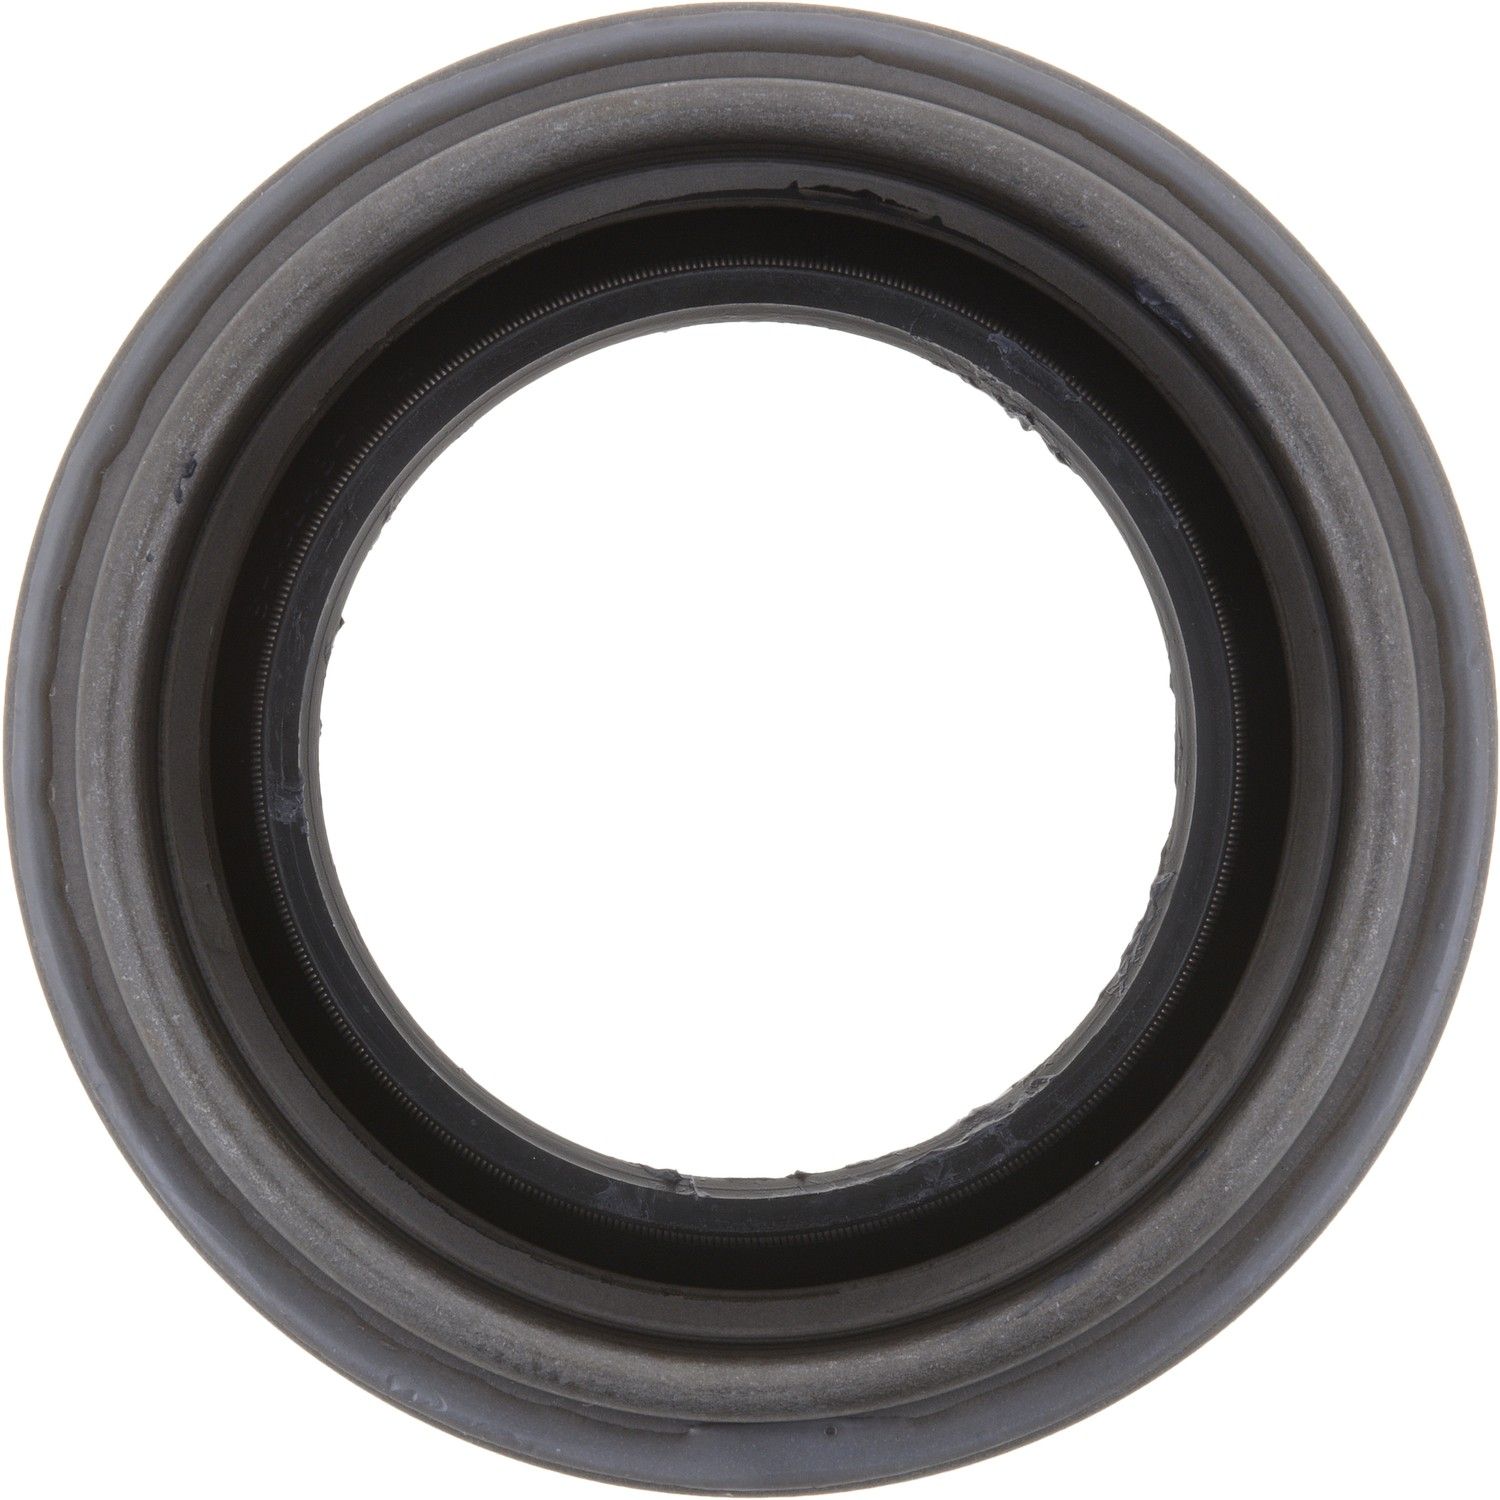 YMS714512 Replacement Pinion Seal for Dana S135 Differential Yukon 